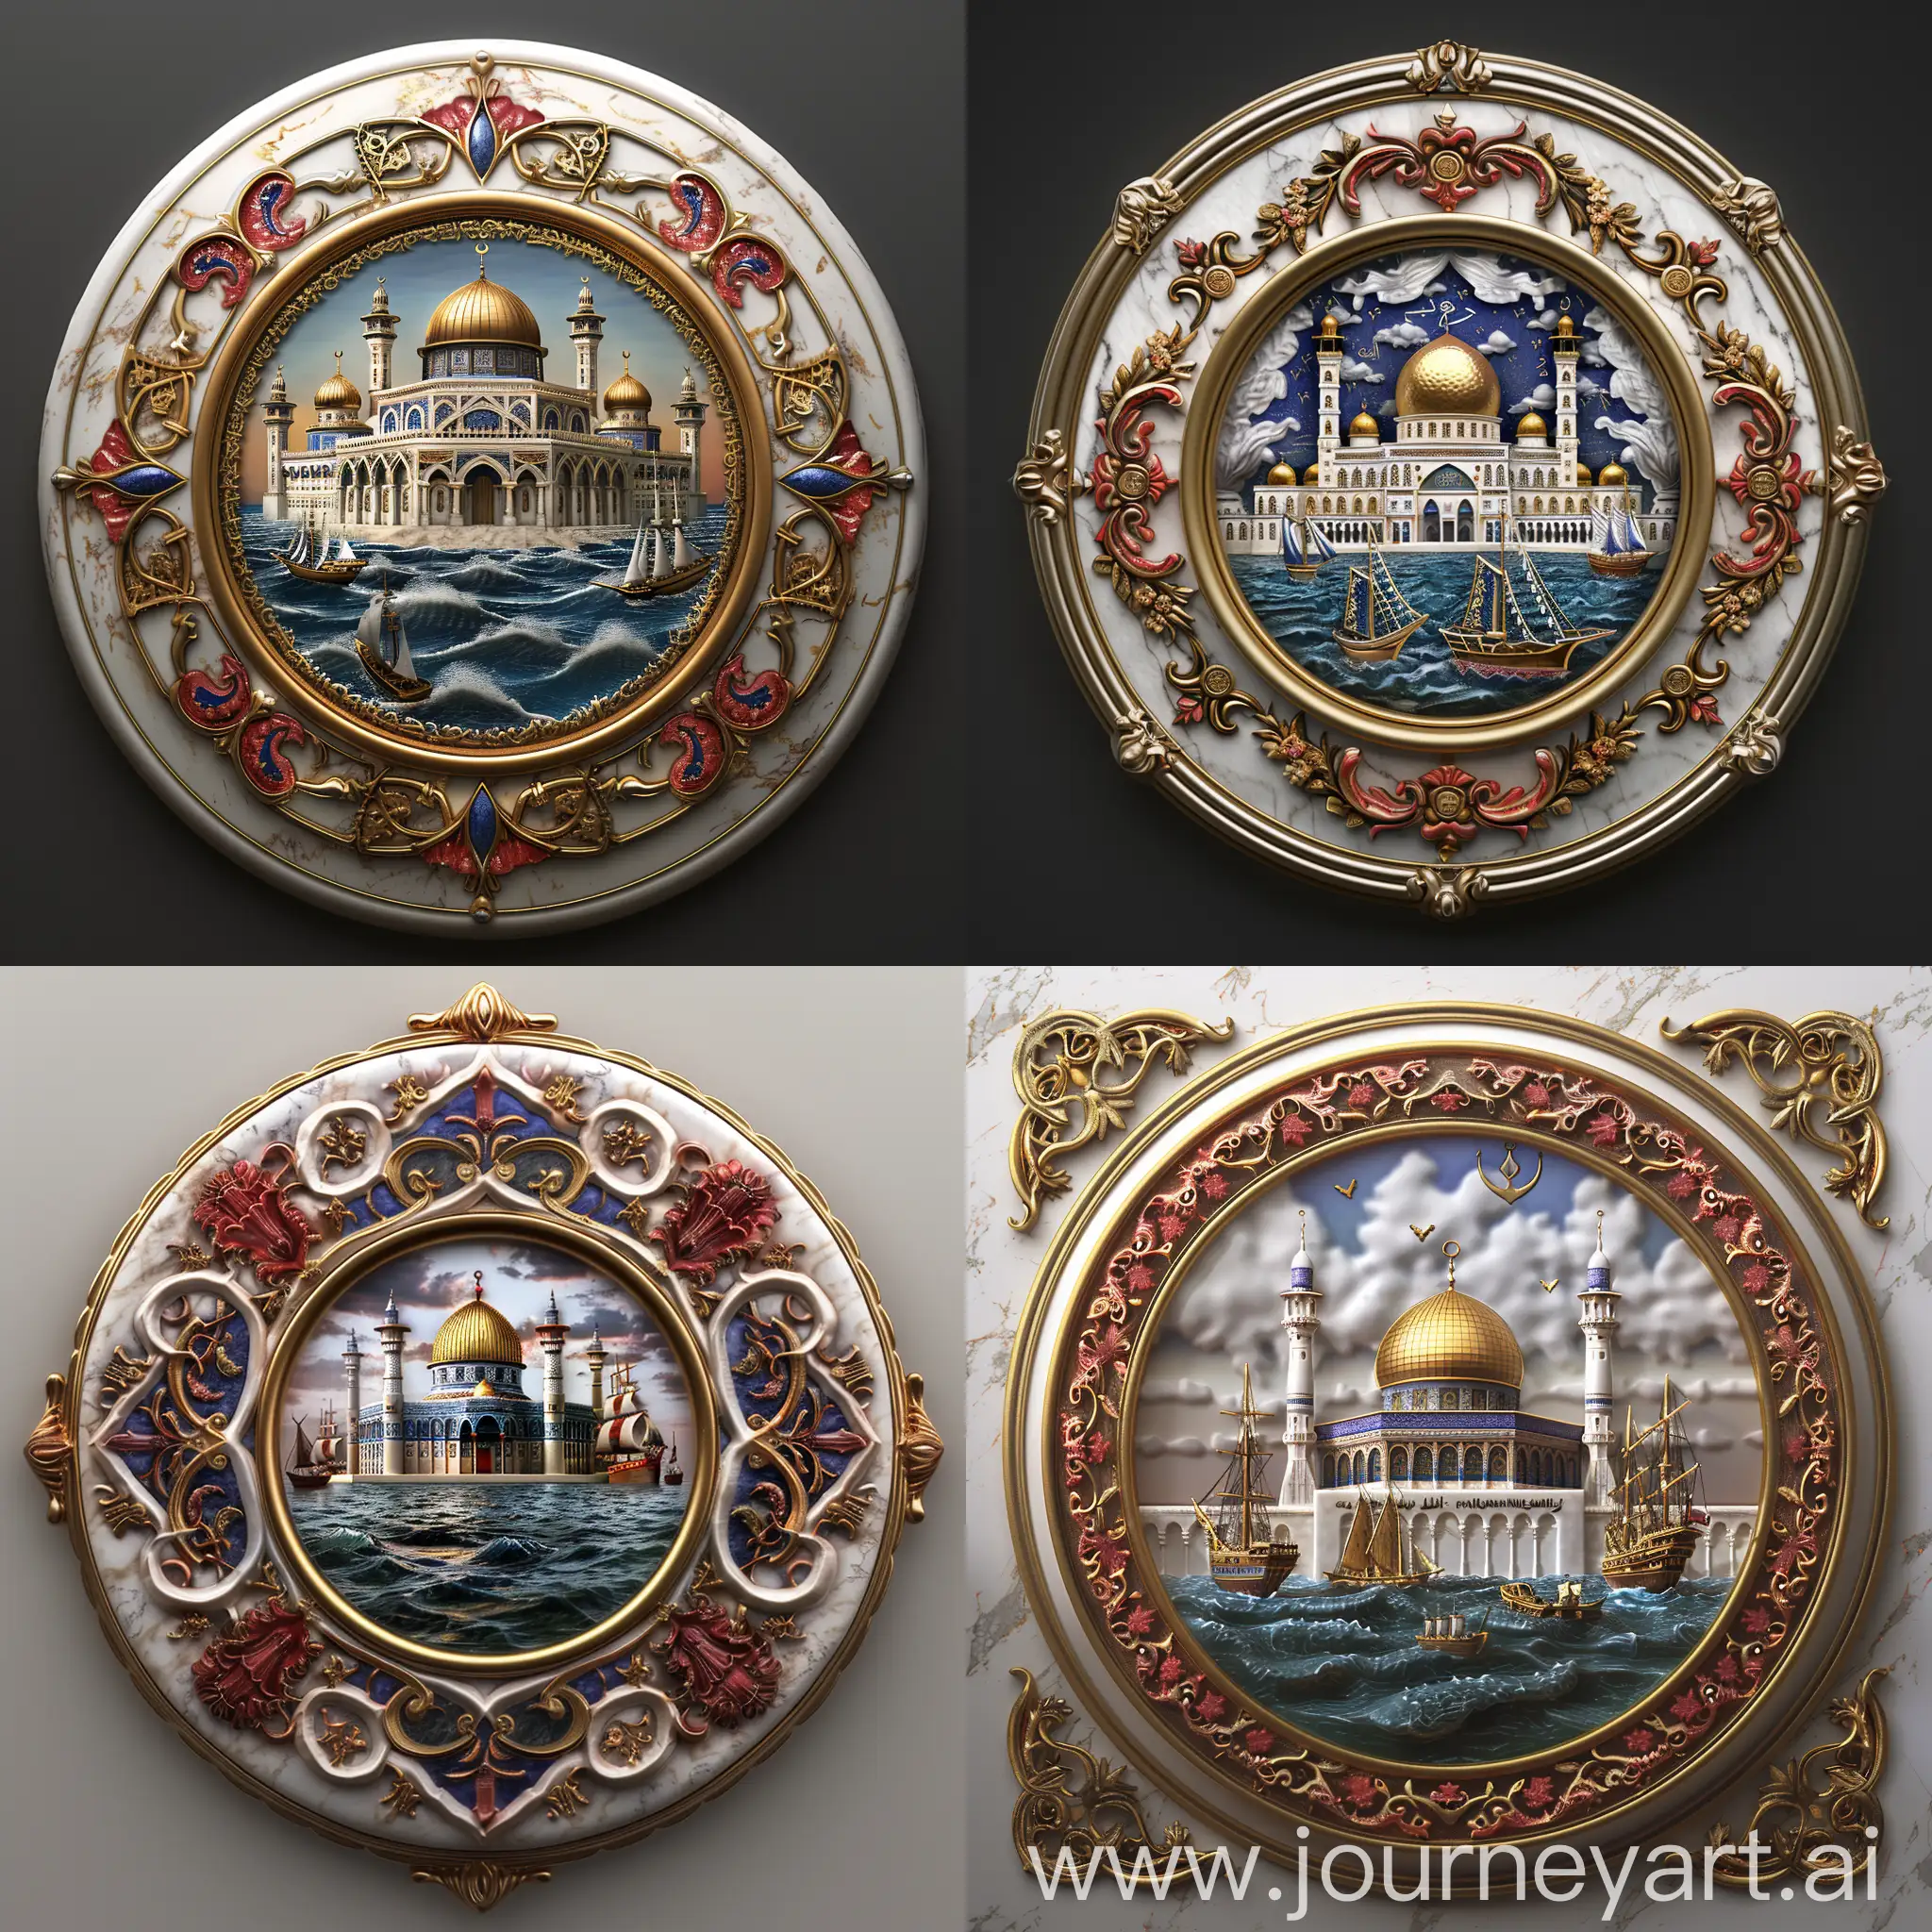 Round-White-Marbled-Porcelain-Medallion-with-Al-Aqsa-Mosque-and-Ships-in-Symmetric-Perspective